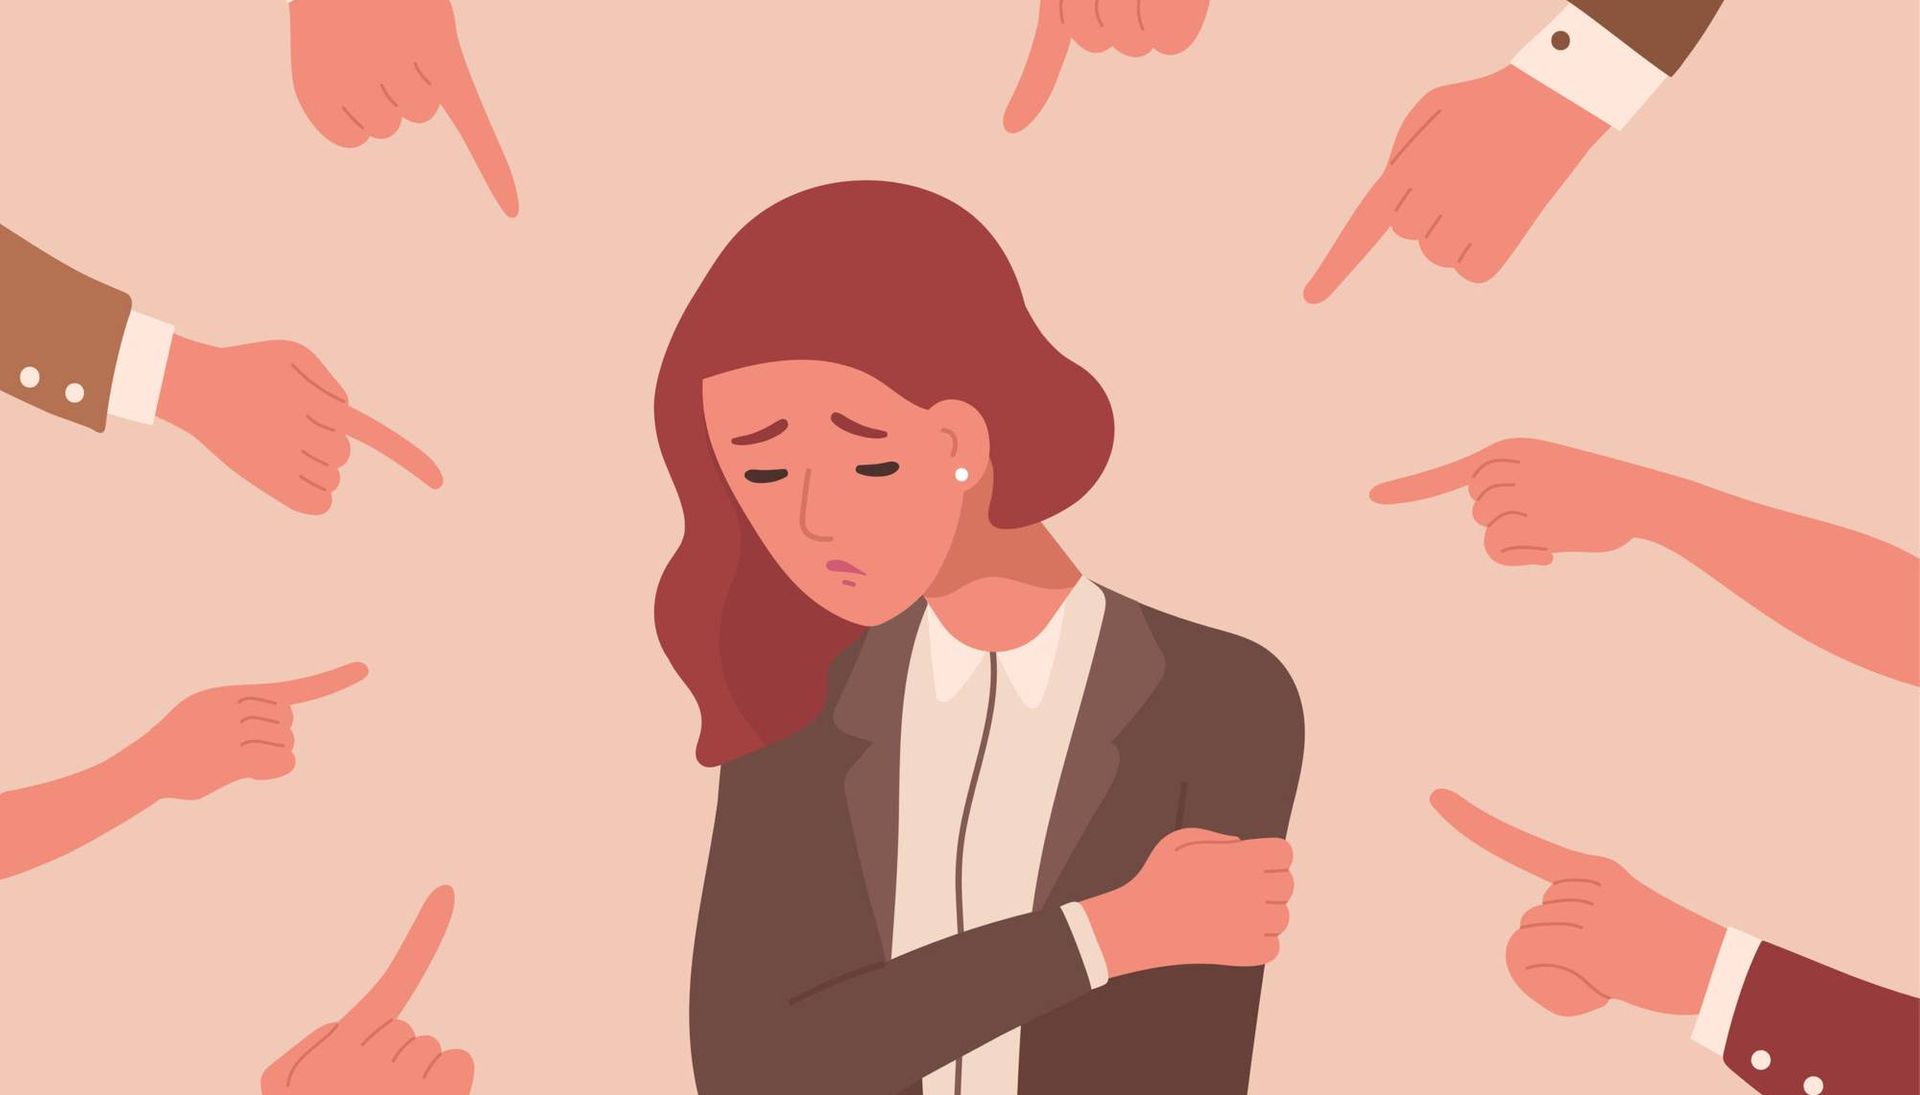 Illustration of unhappy young woman surrounded by hands with index fingers pointing at her